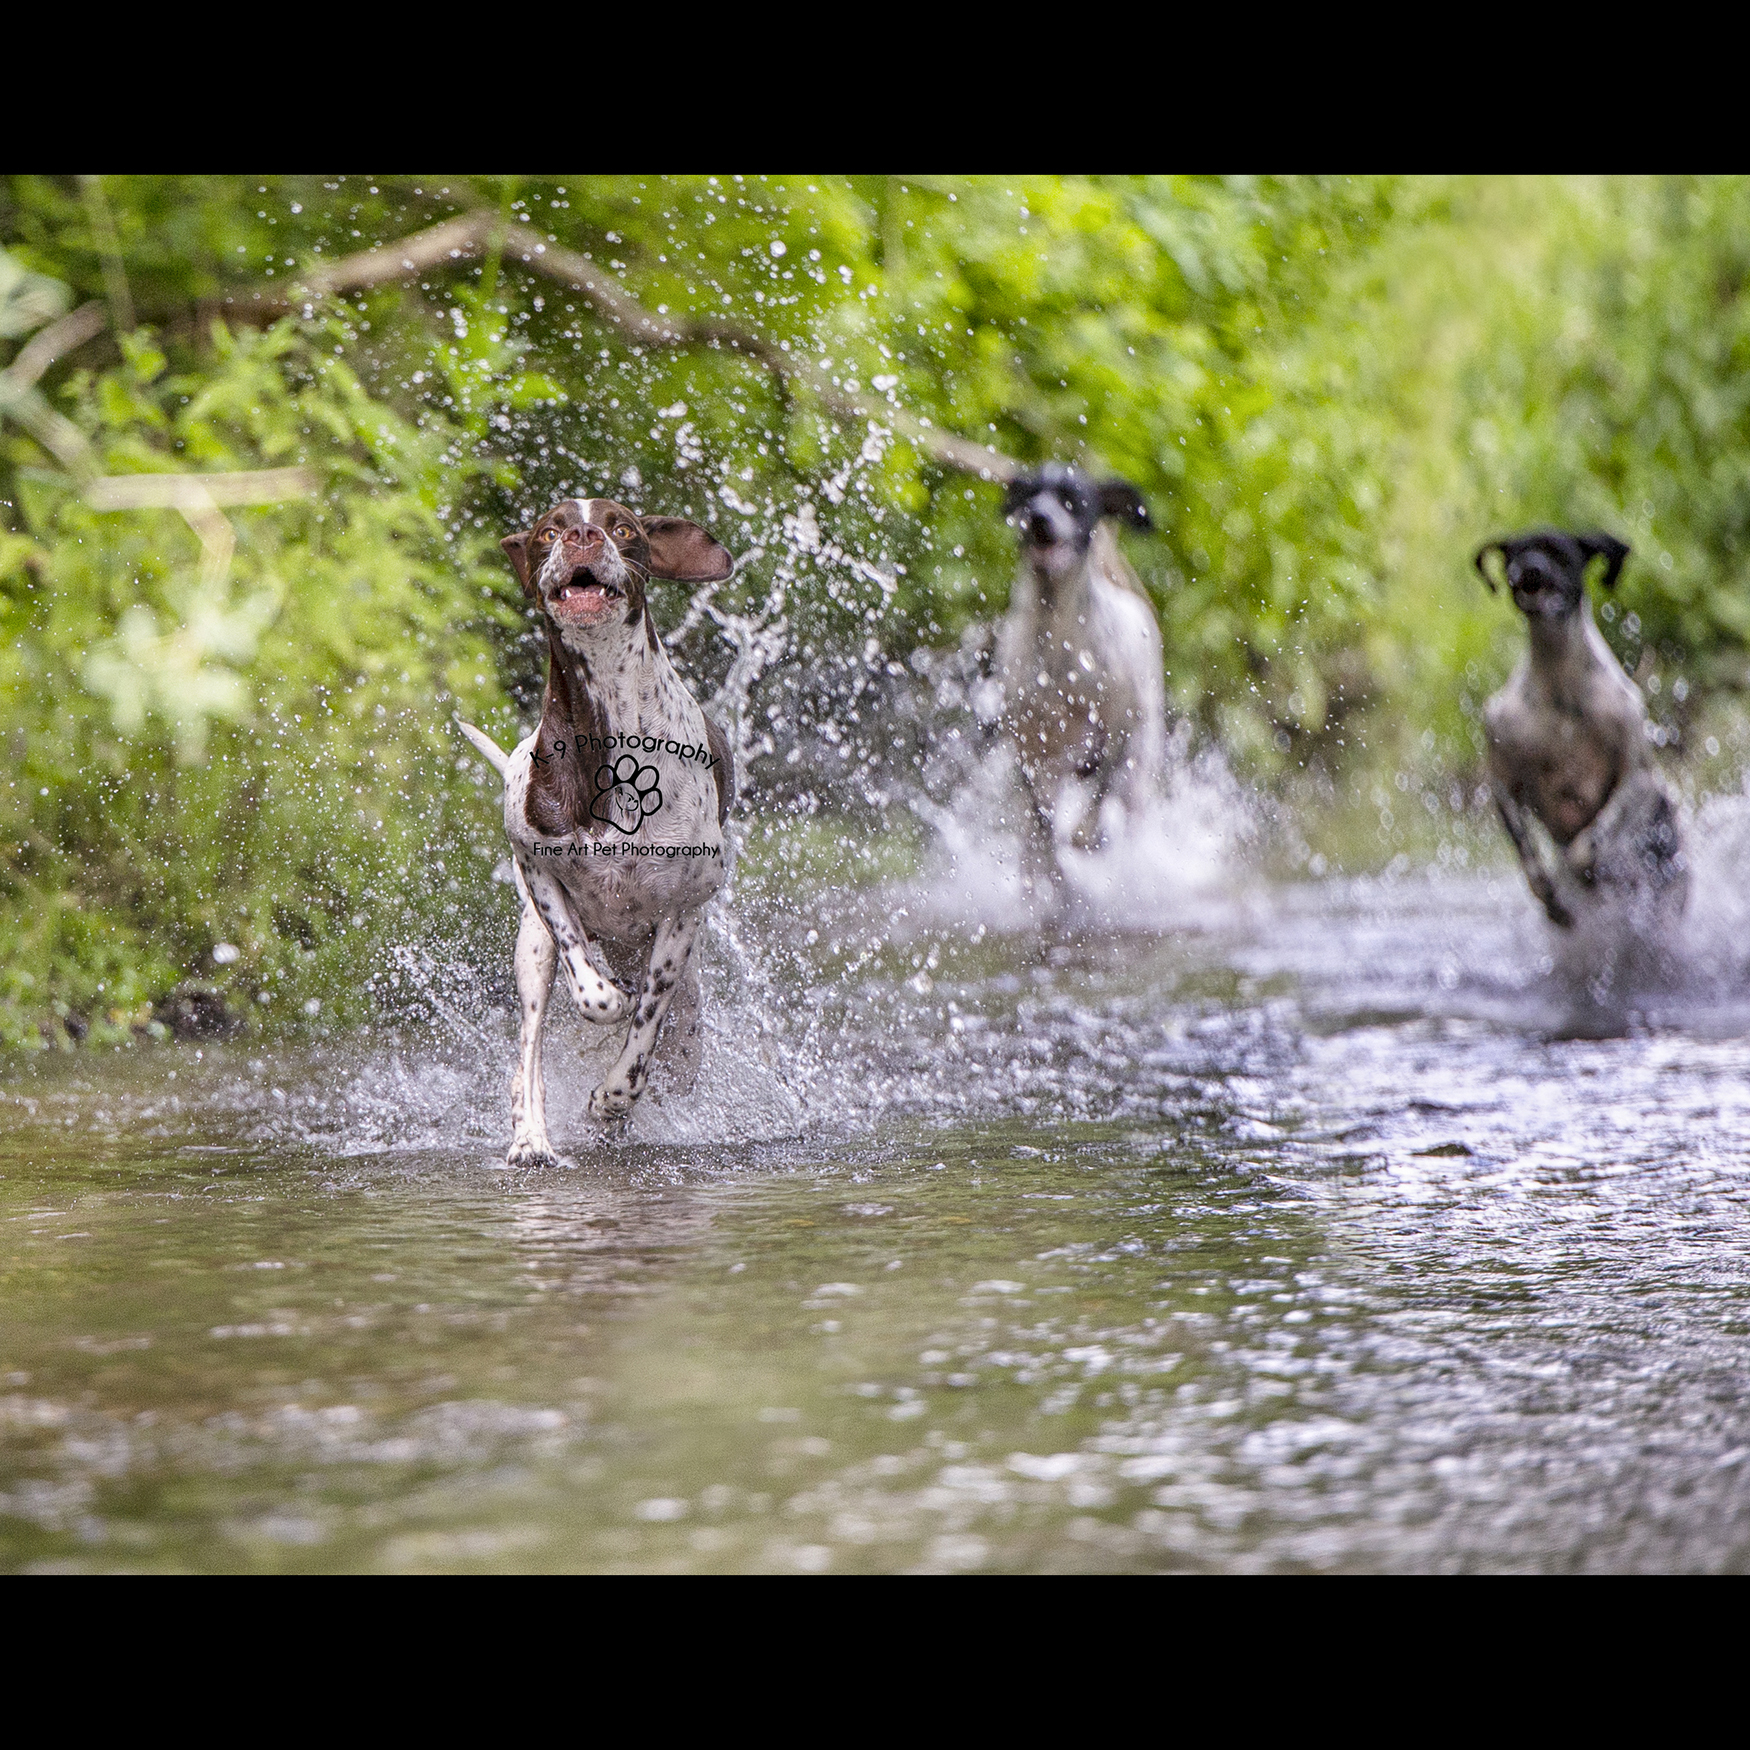 Home | Dog Photographer Bedfordshire and the UK